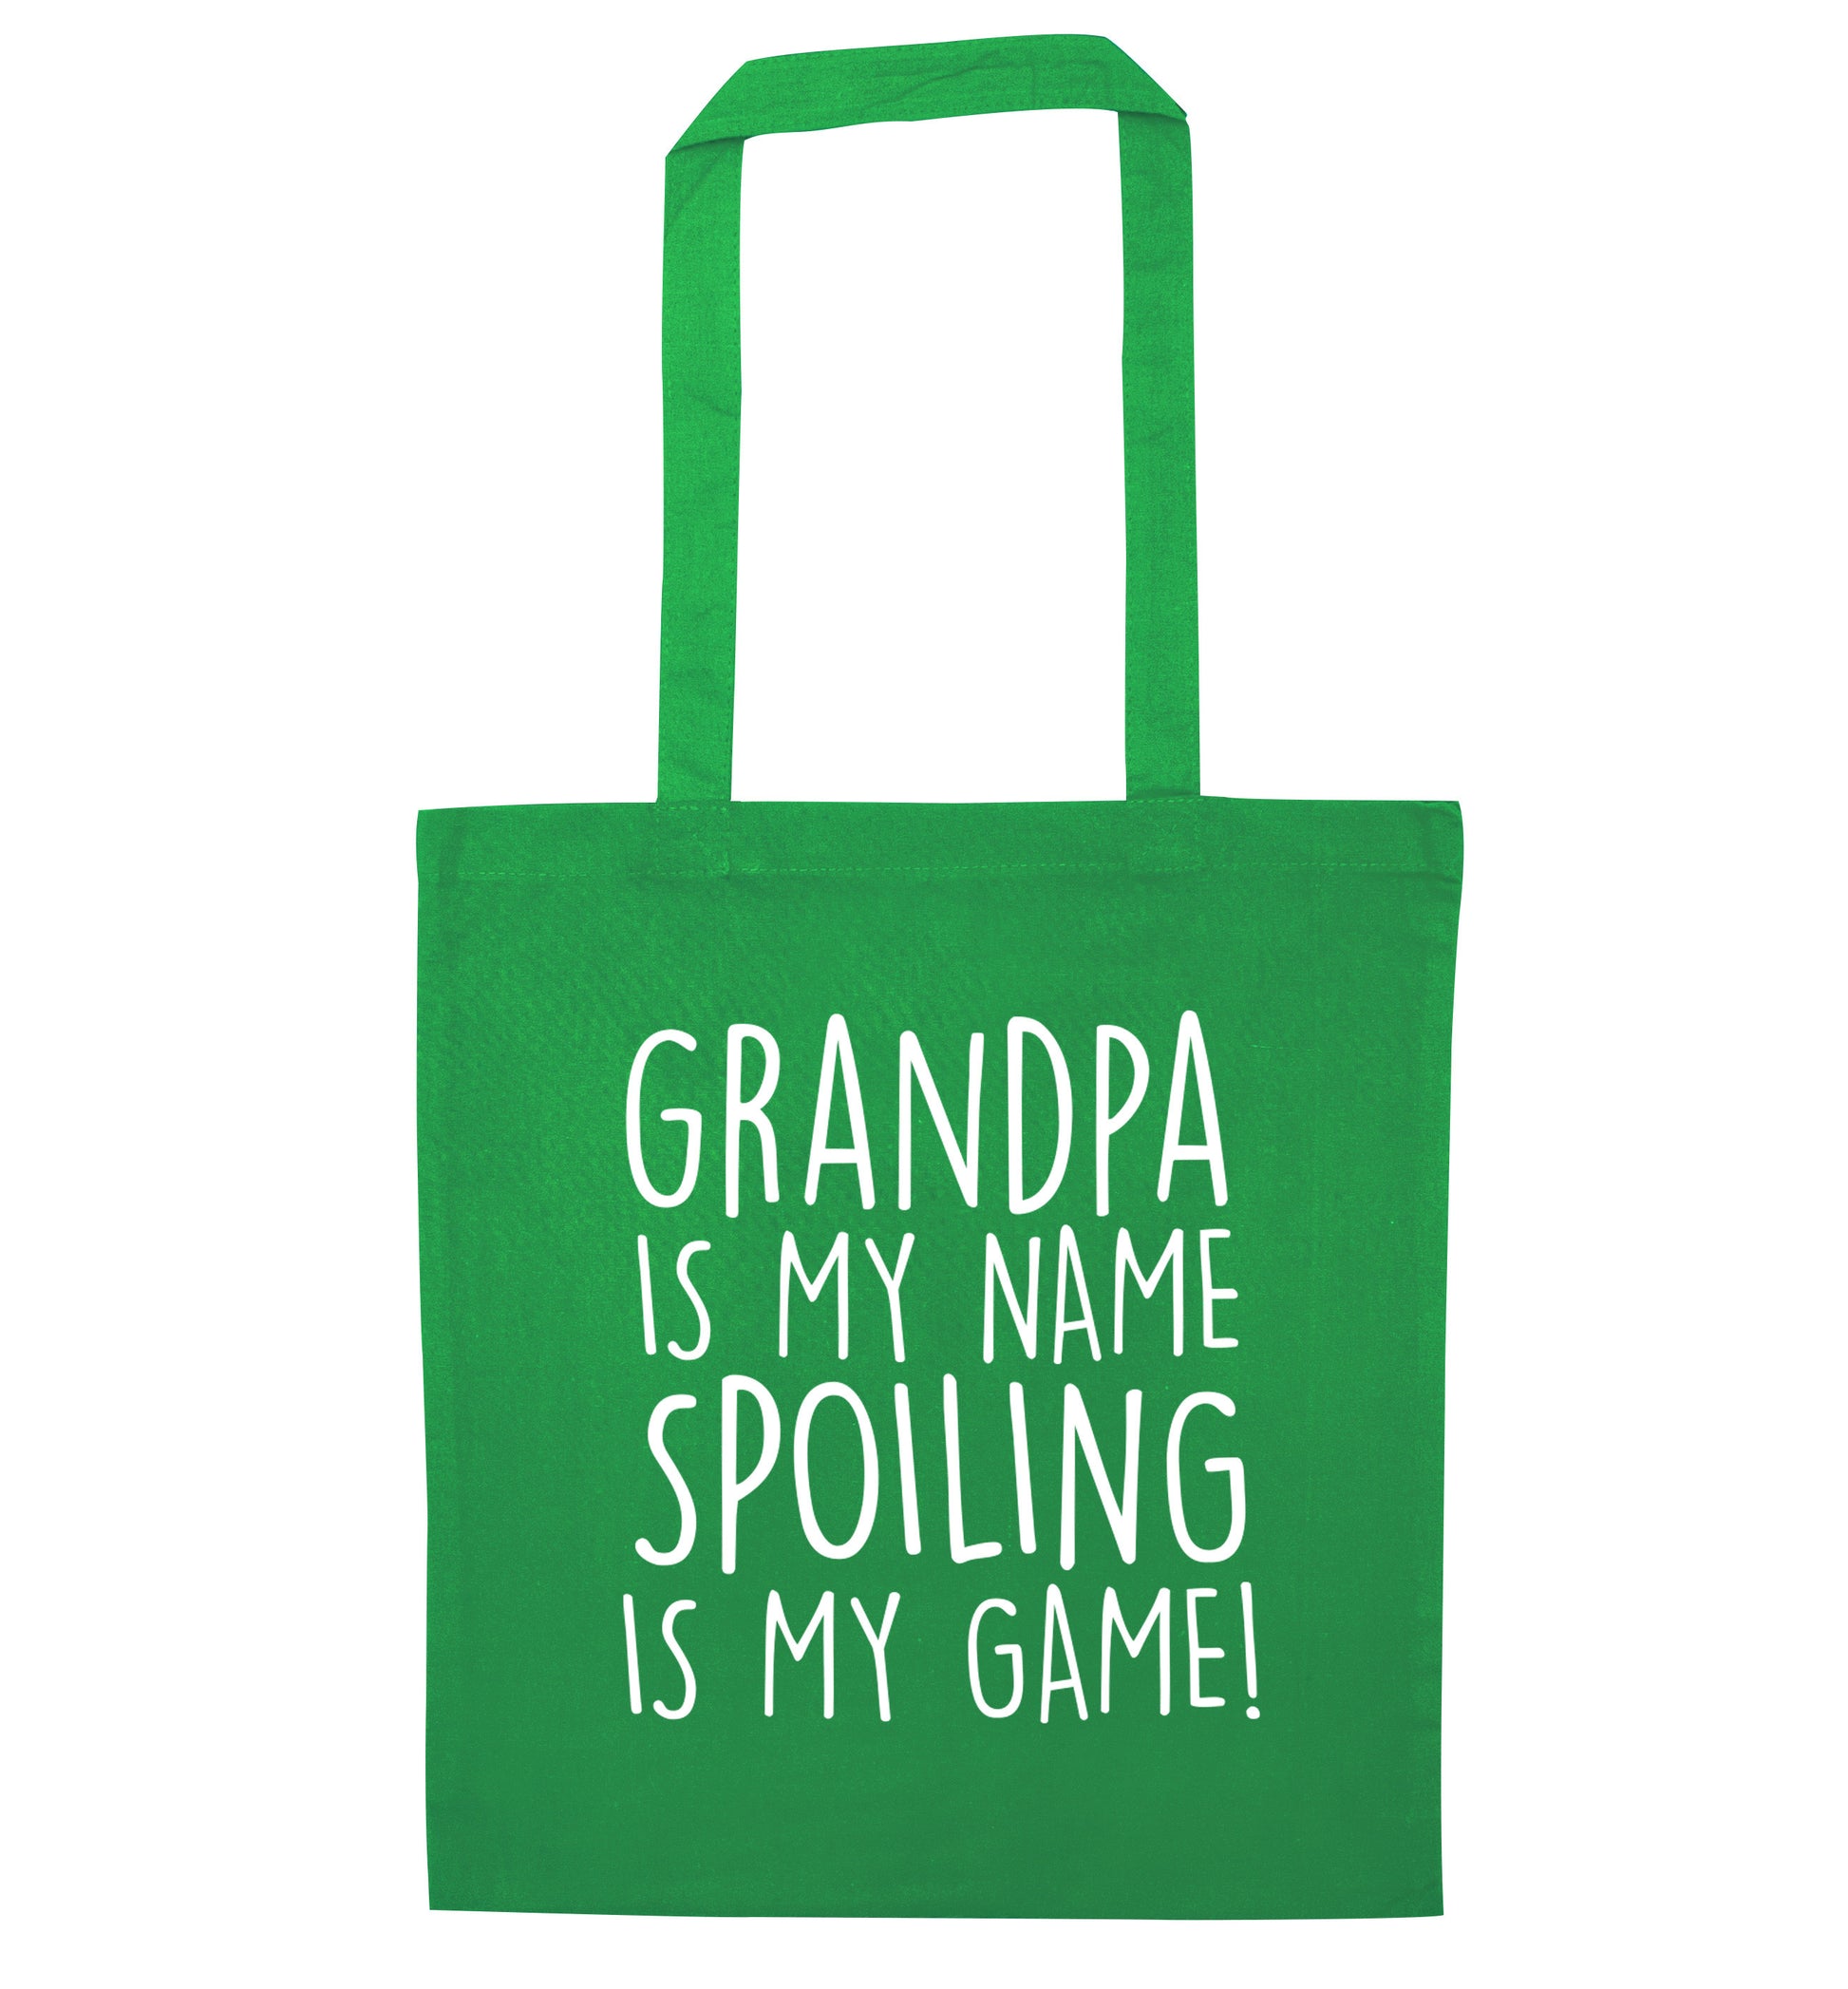 Grandpa is my name, spoiling is my game green tote bag